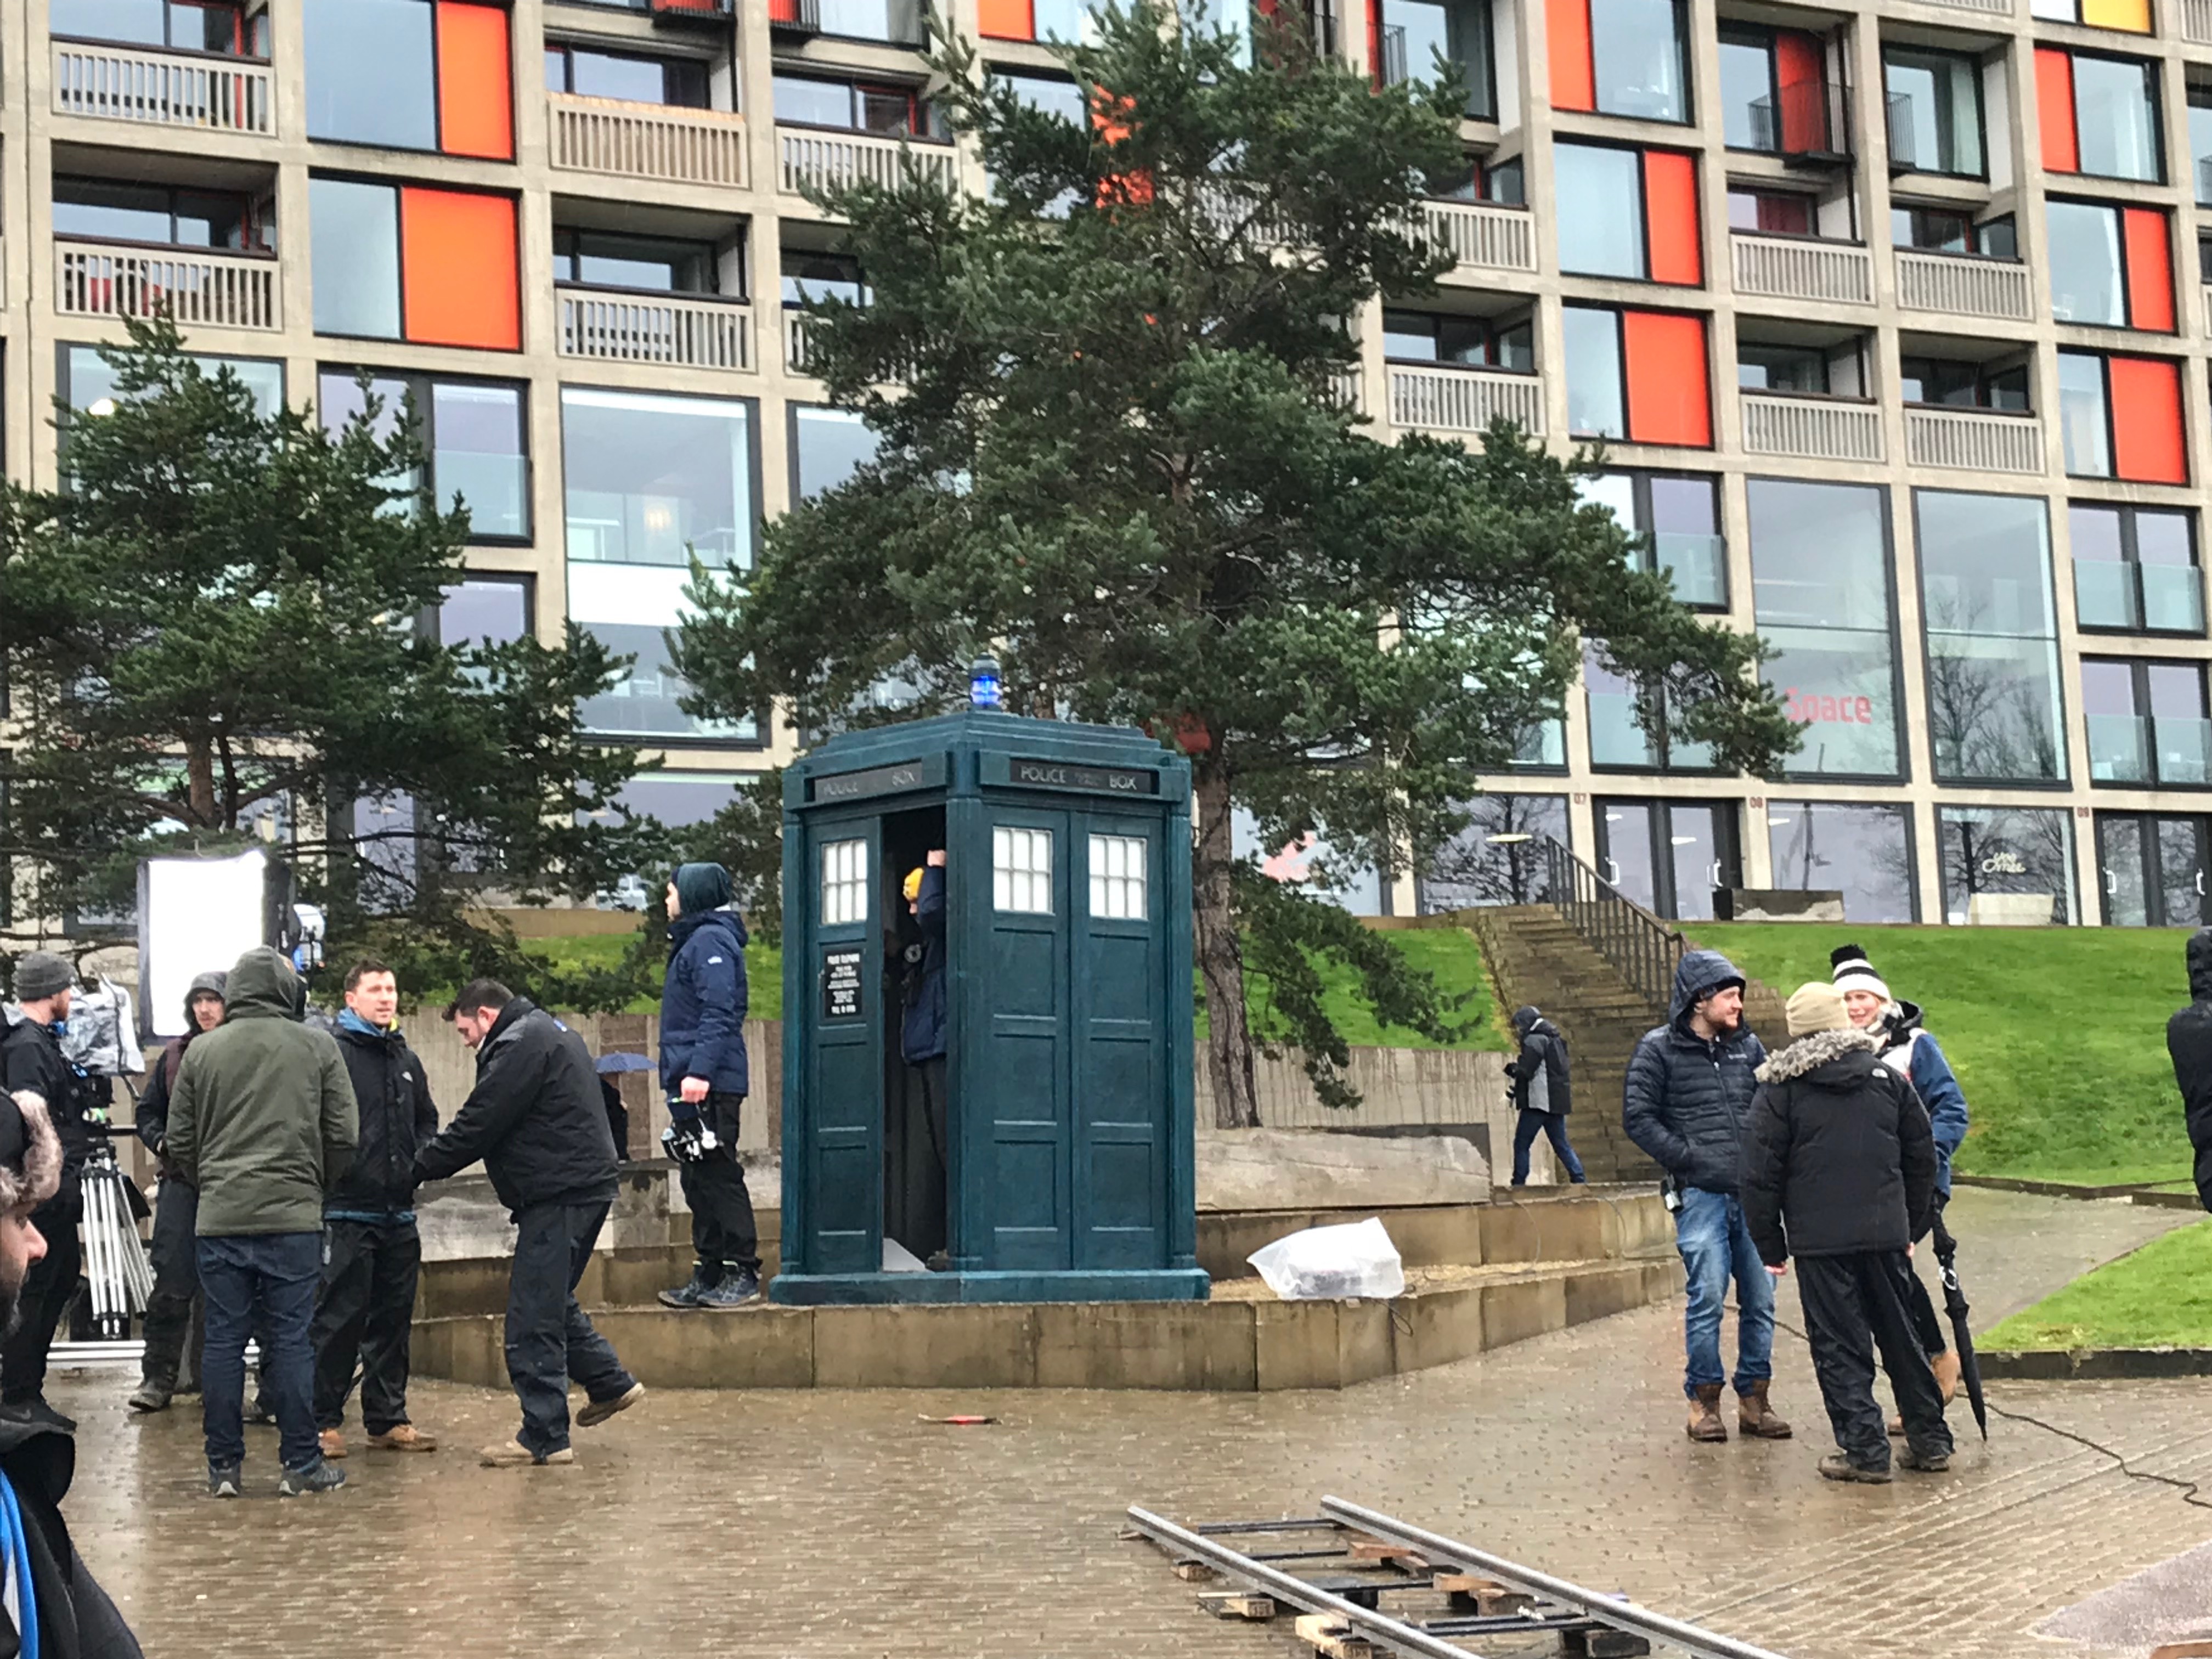 doctor-who-filming-sheffield-2018_25375781807_o